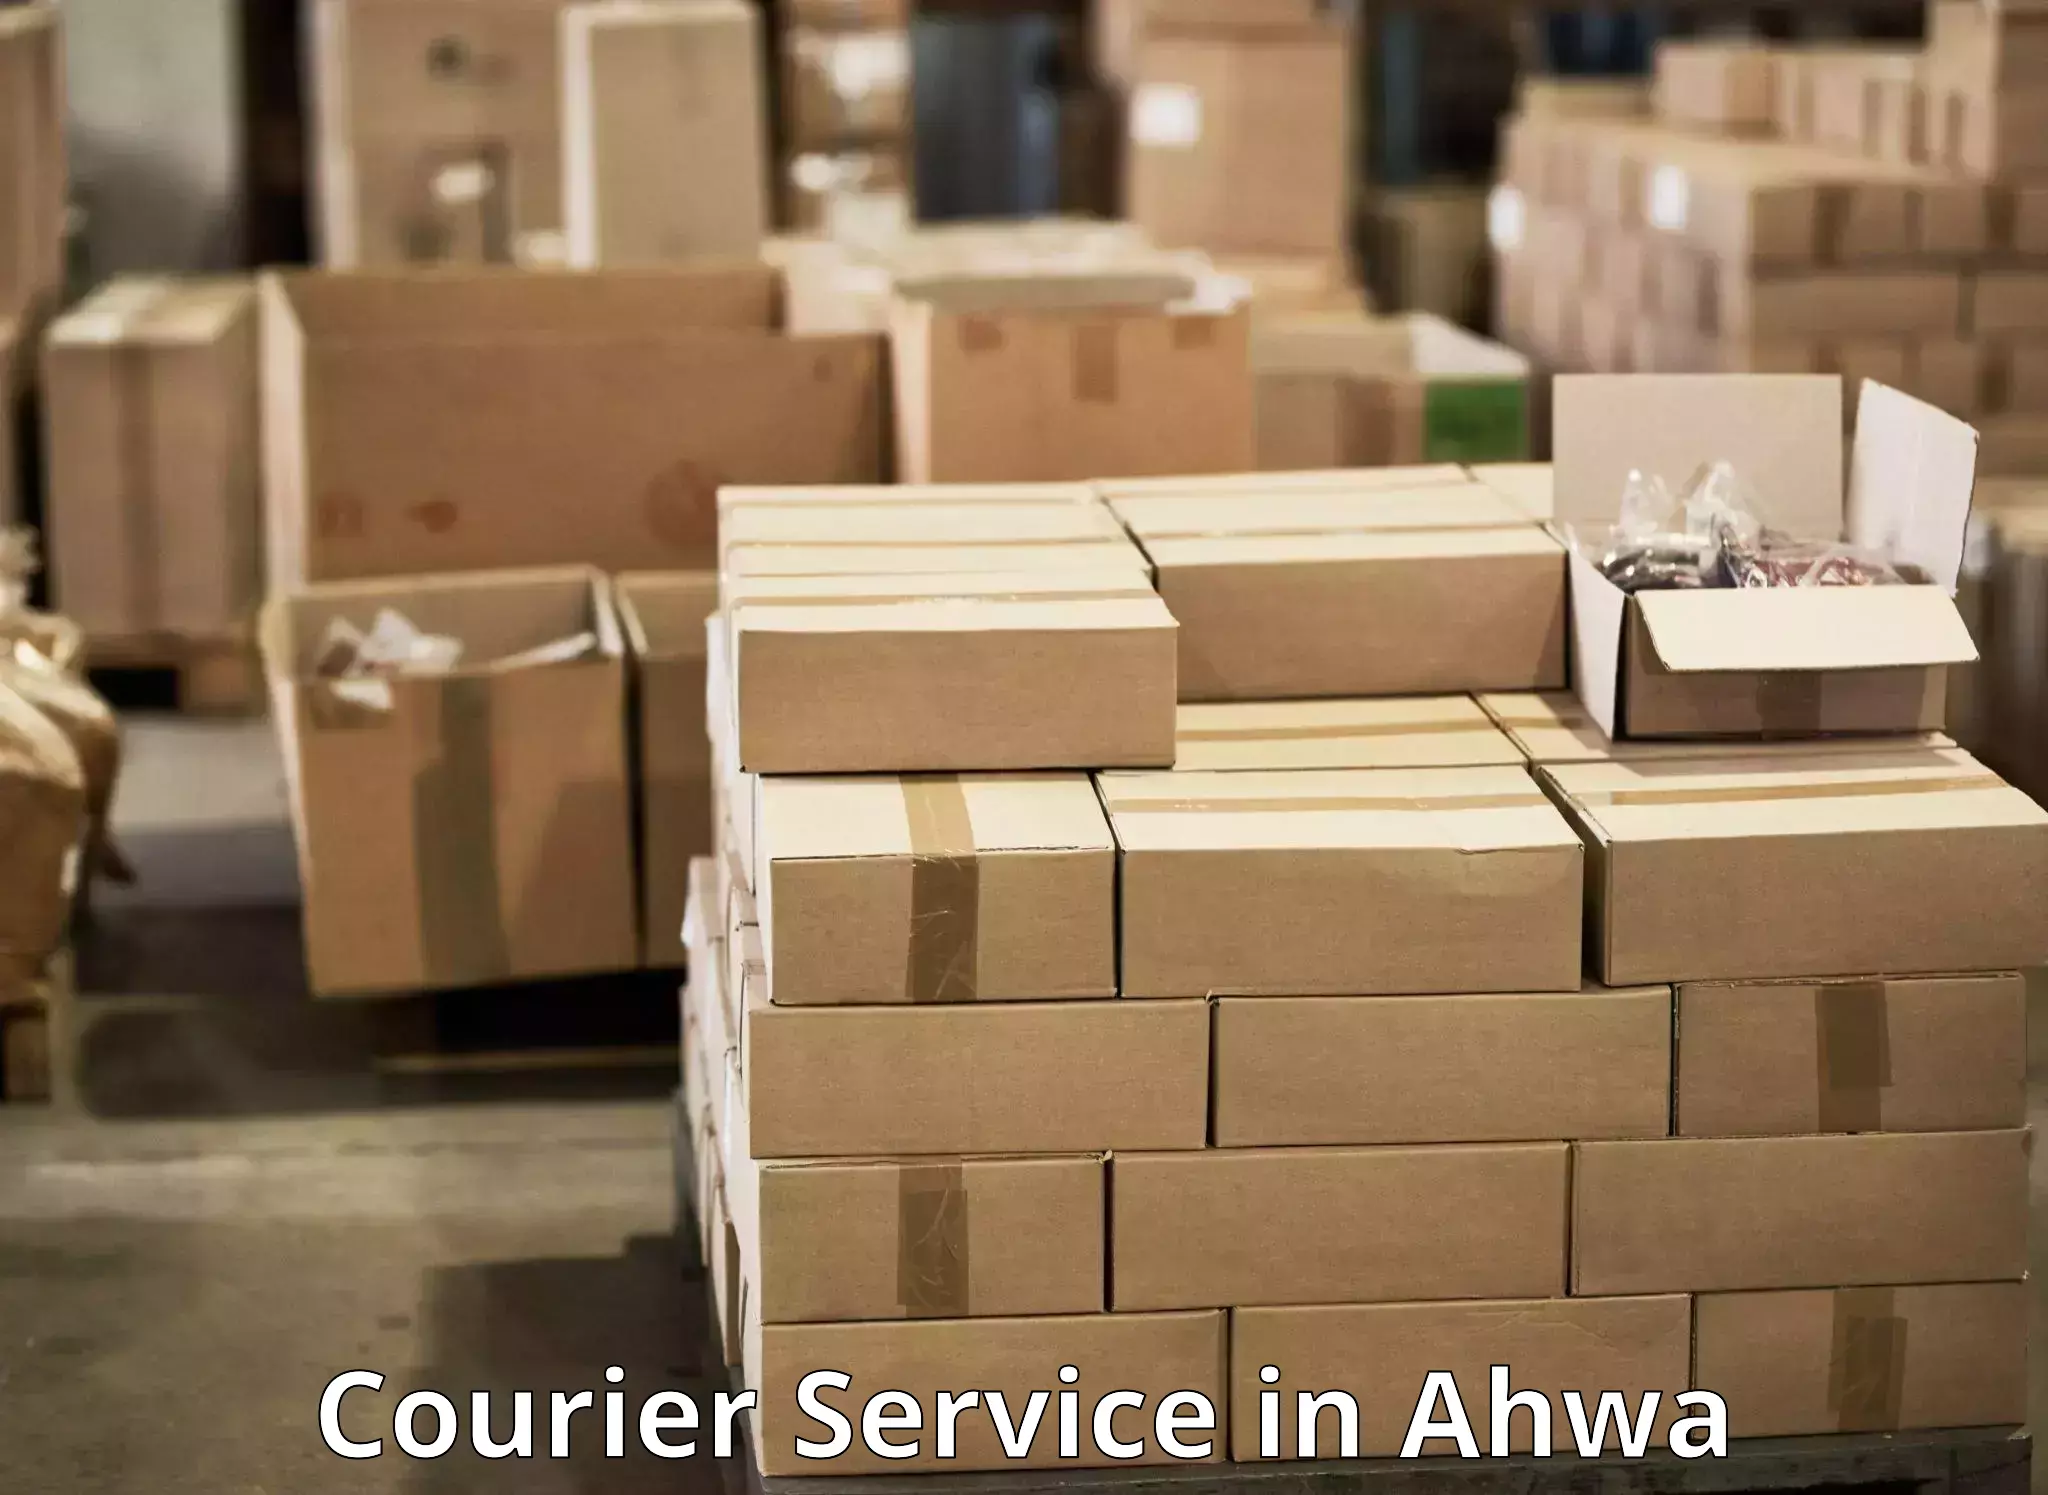 Small parcel delivery in Ahwa